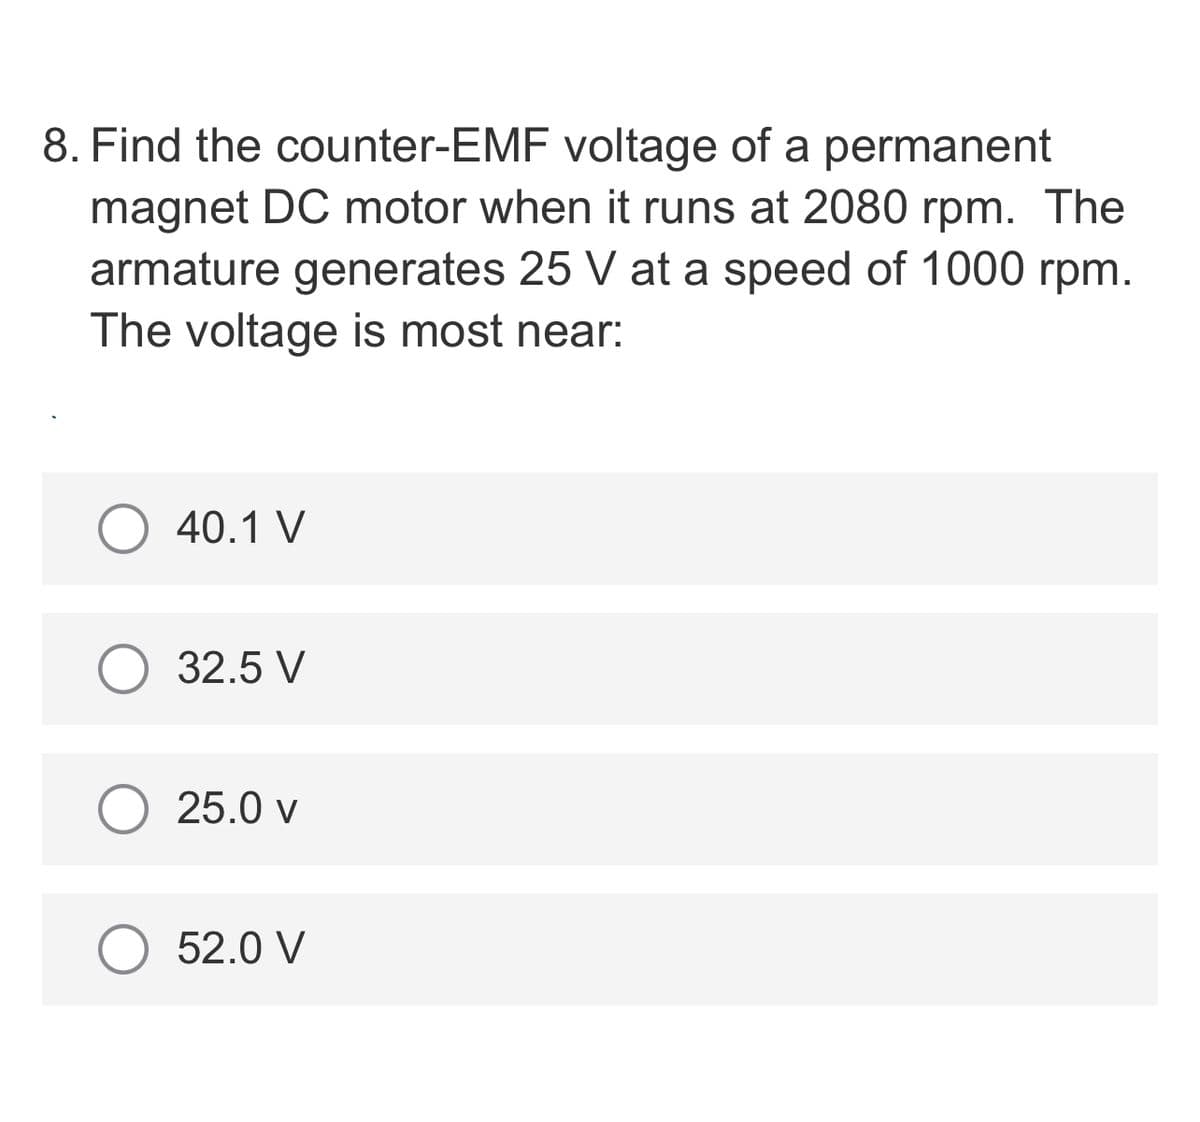 8. Find the counter-EMF voltage of a permanent
magnet DC motor when it runs at 2080 rpm. The
armature generates 25 V at a speed of 1000 rpm.
The voltage is most near:
40.1 V
32.5 V
25.0 v
52.0 V
